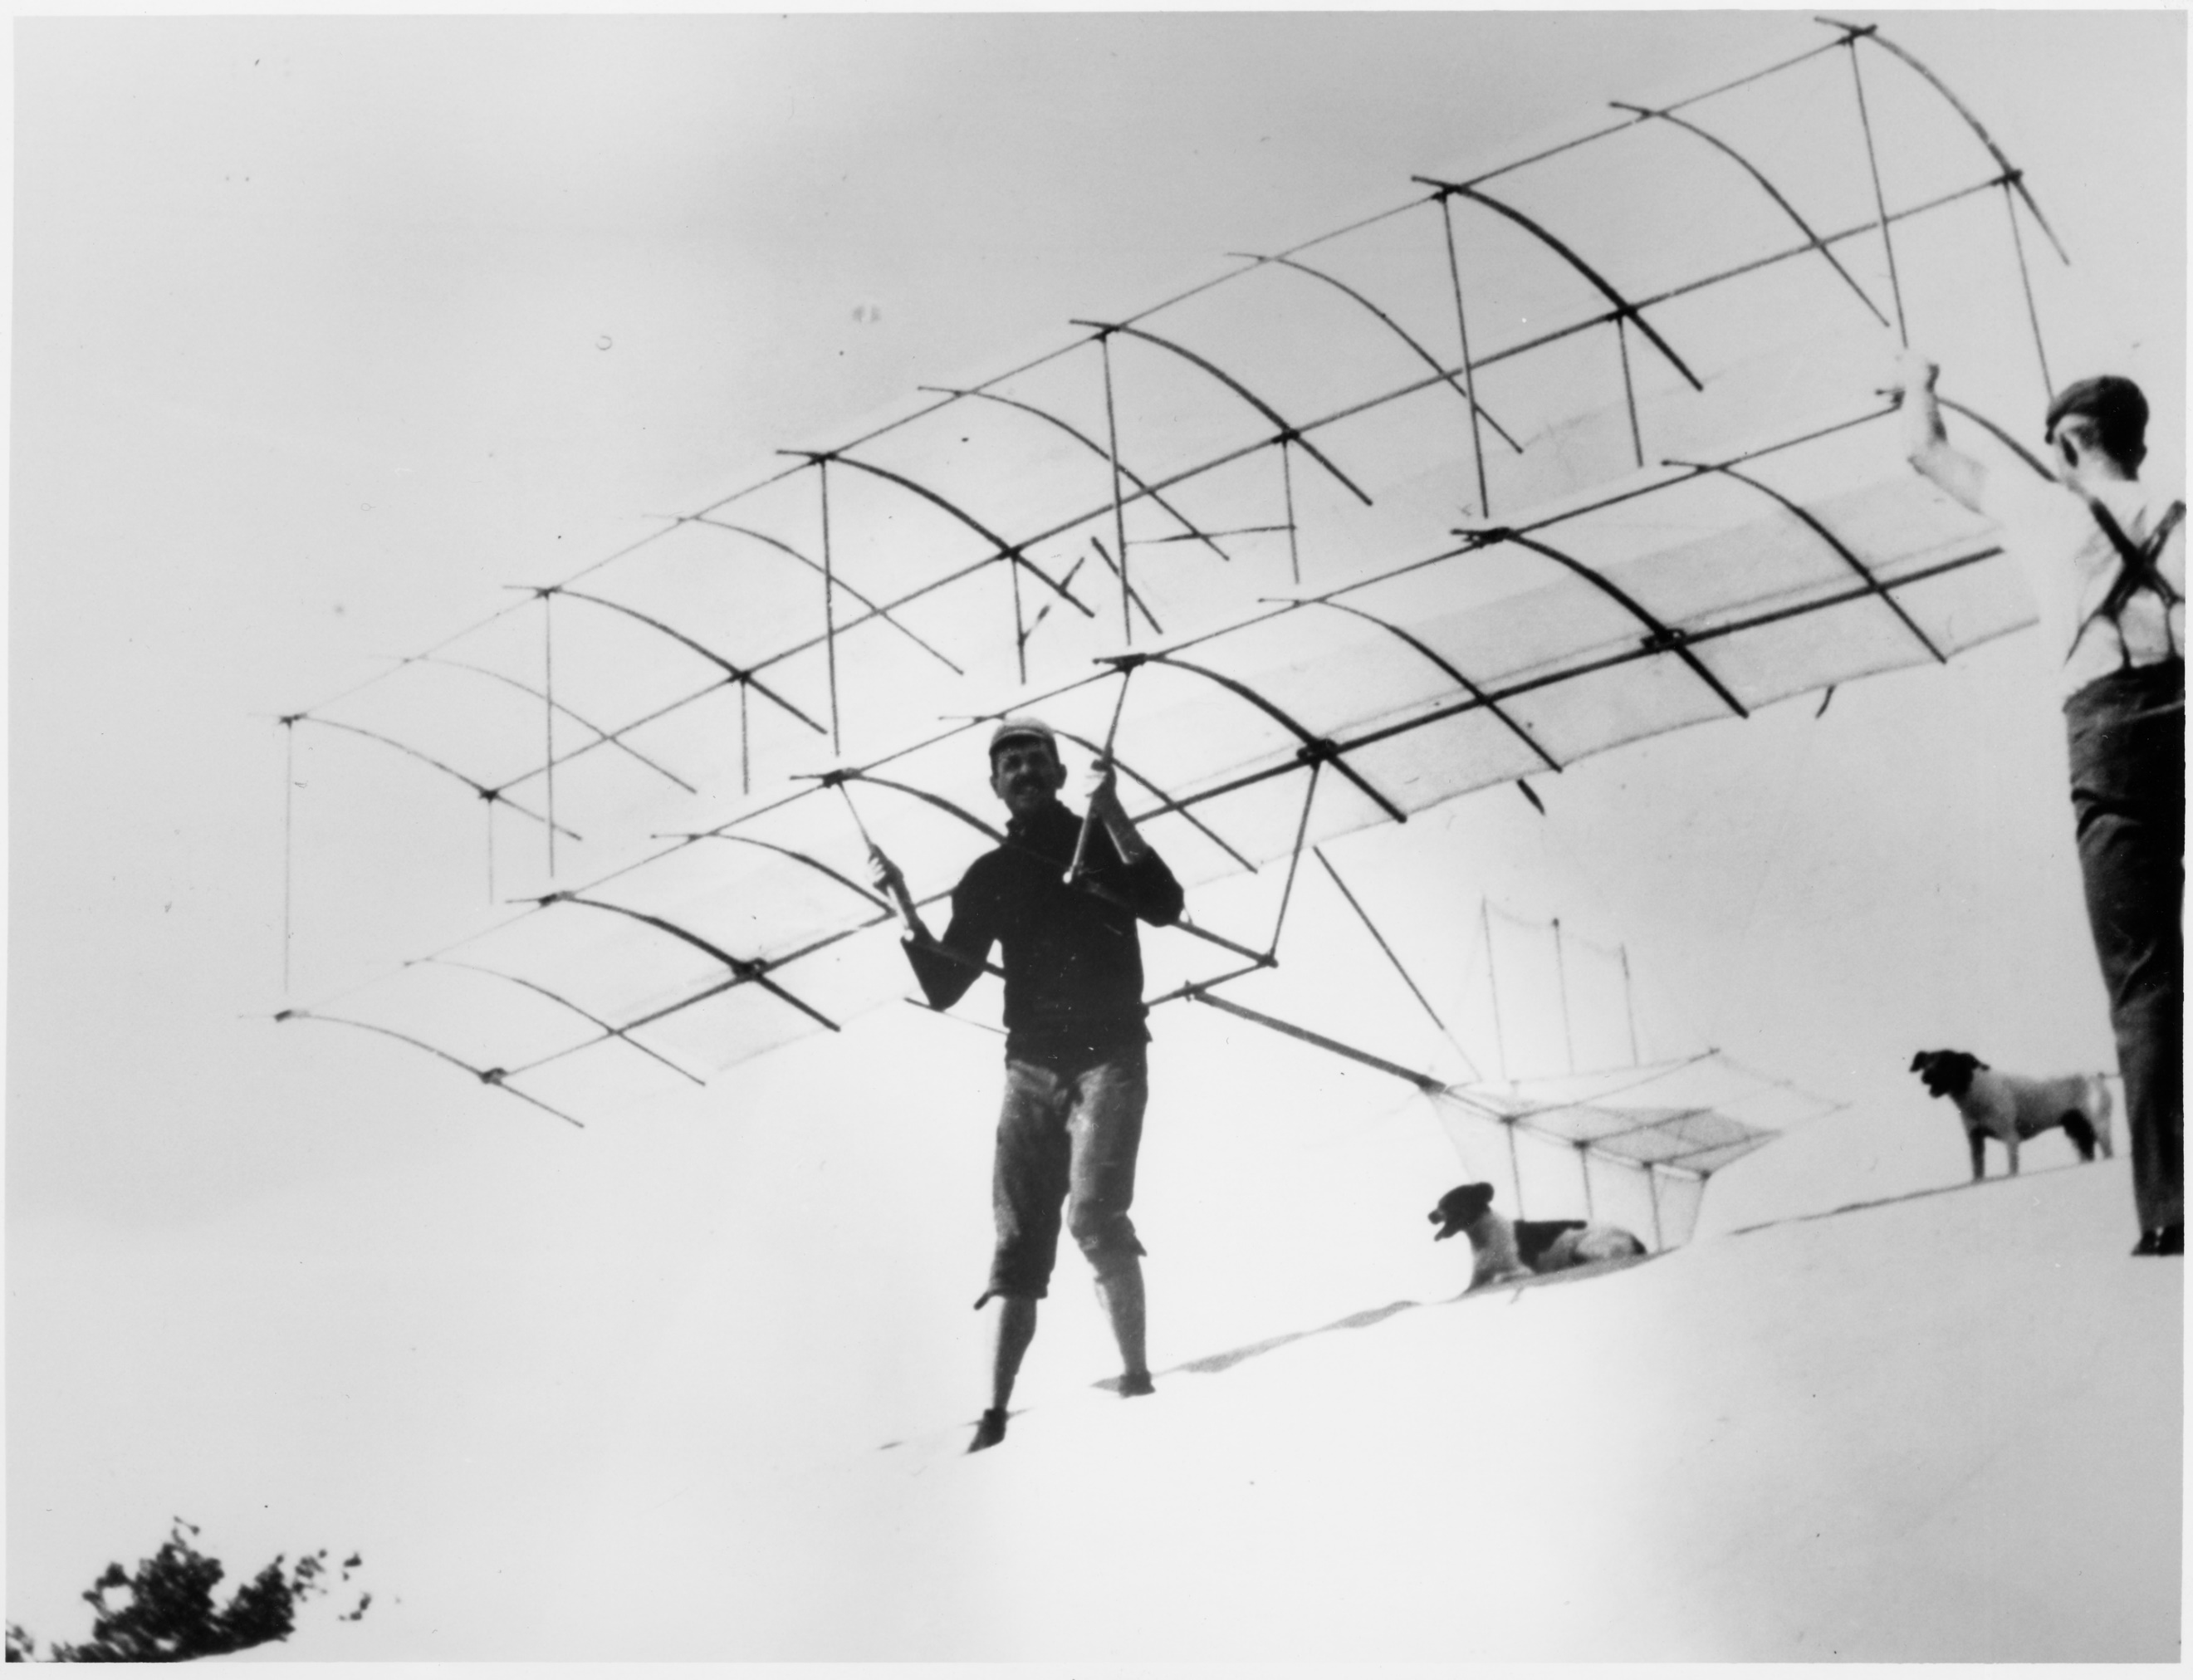 historic image of a man about standing on a hill about to take off in a glider from the standing position. A man and two dogs are also in the photo. 